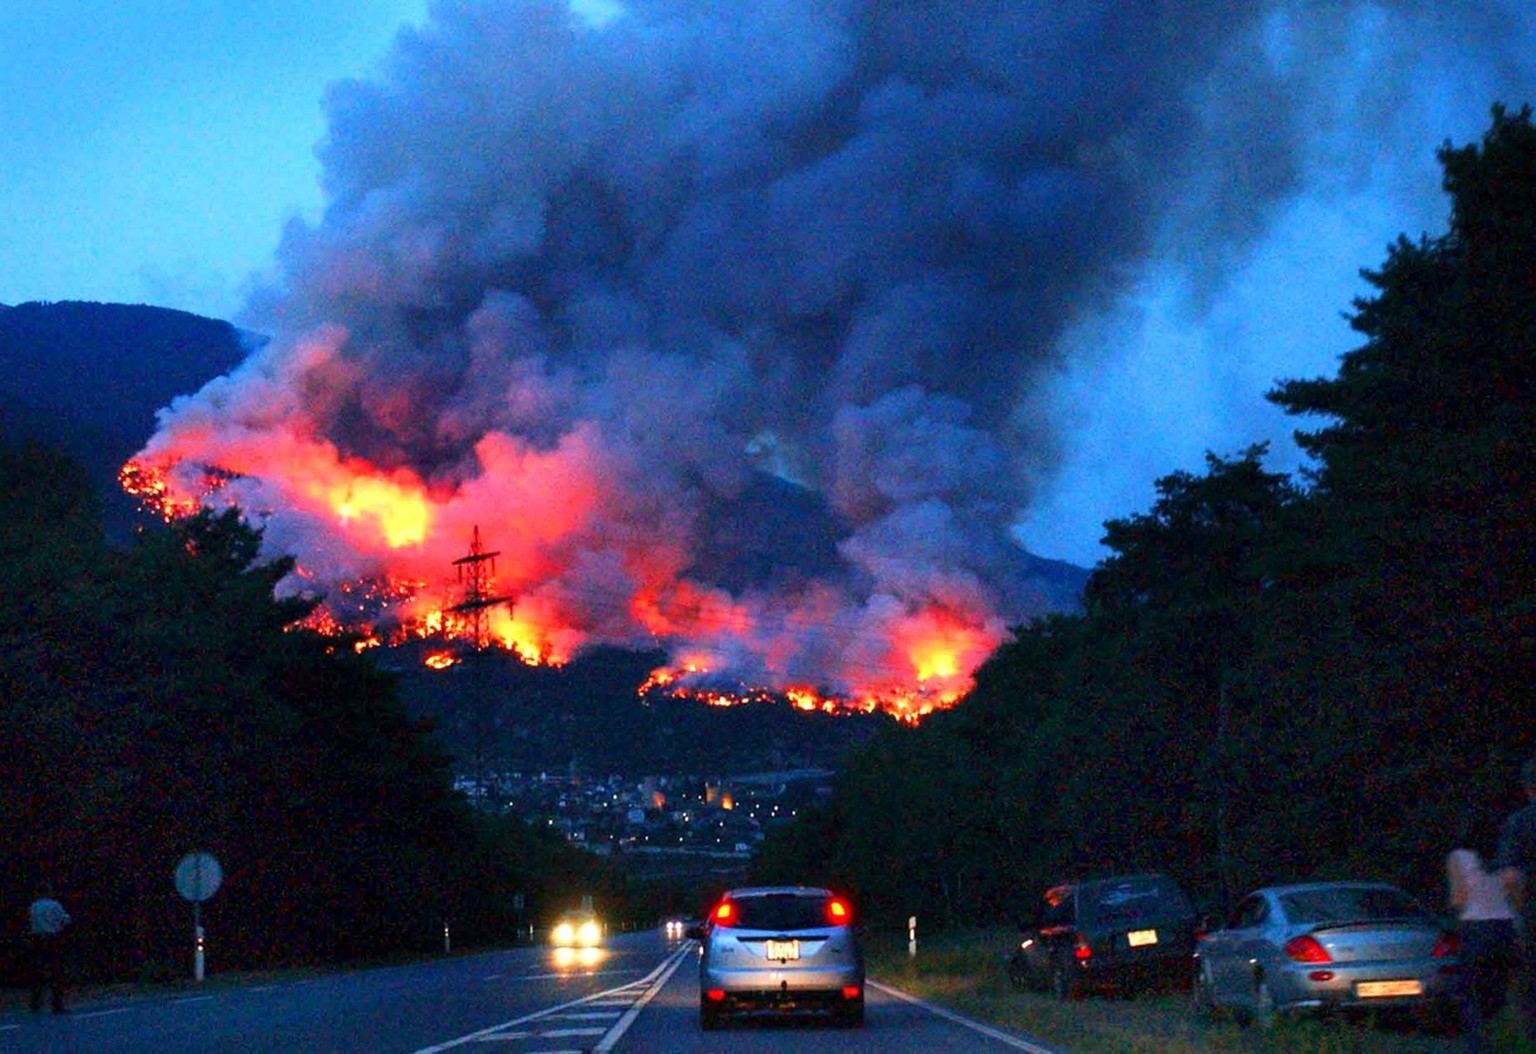 A forest fire that broke out at the border of the village of Leuk, southern Switzerland, early Thursday, August 14, 2003. Due to the drought, several wildfires erupted over the last days in Switzerlan ...